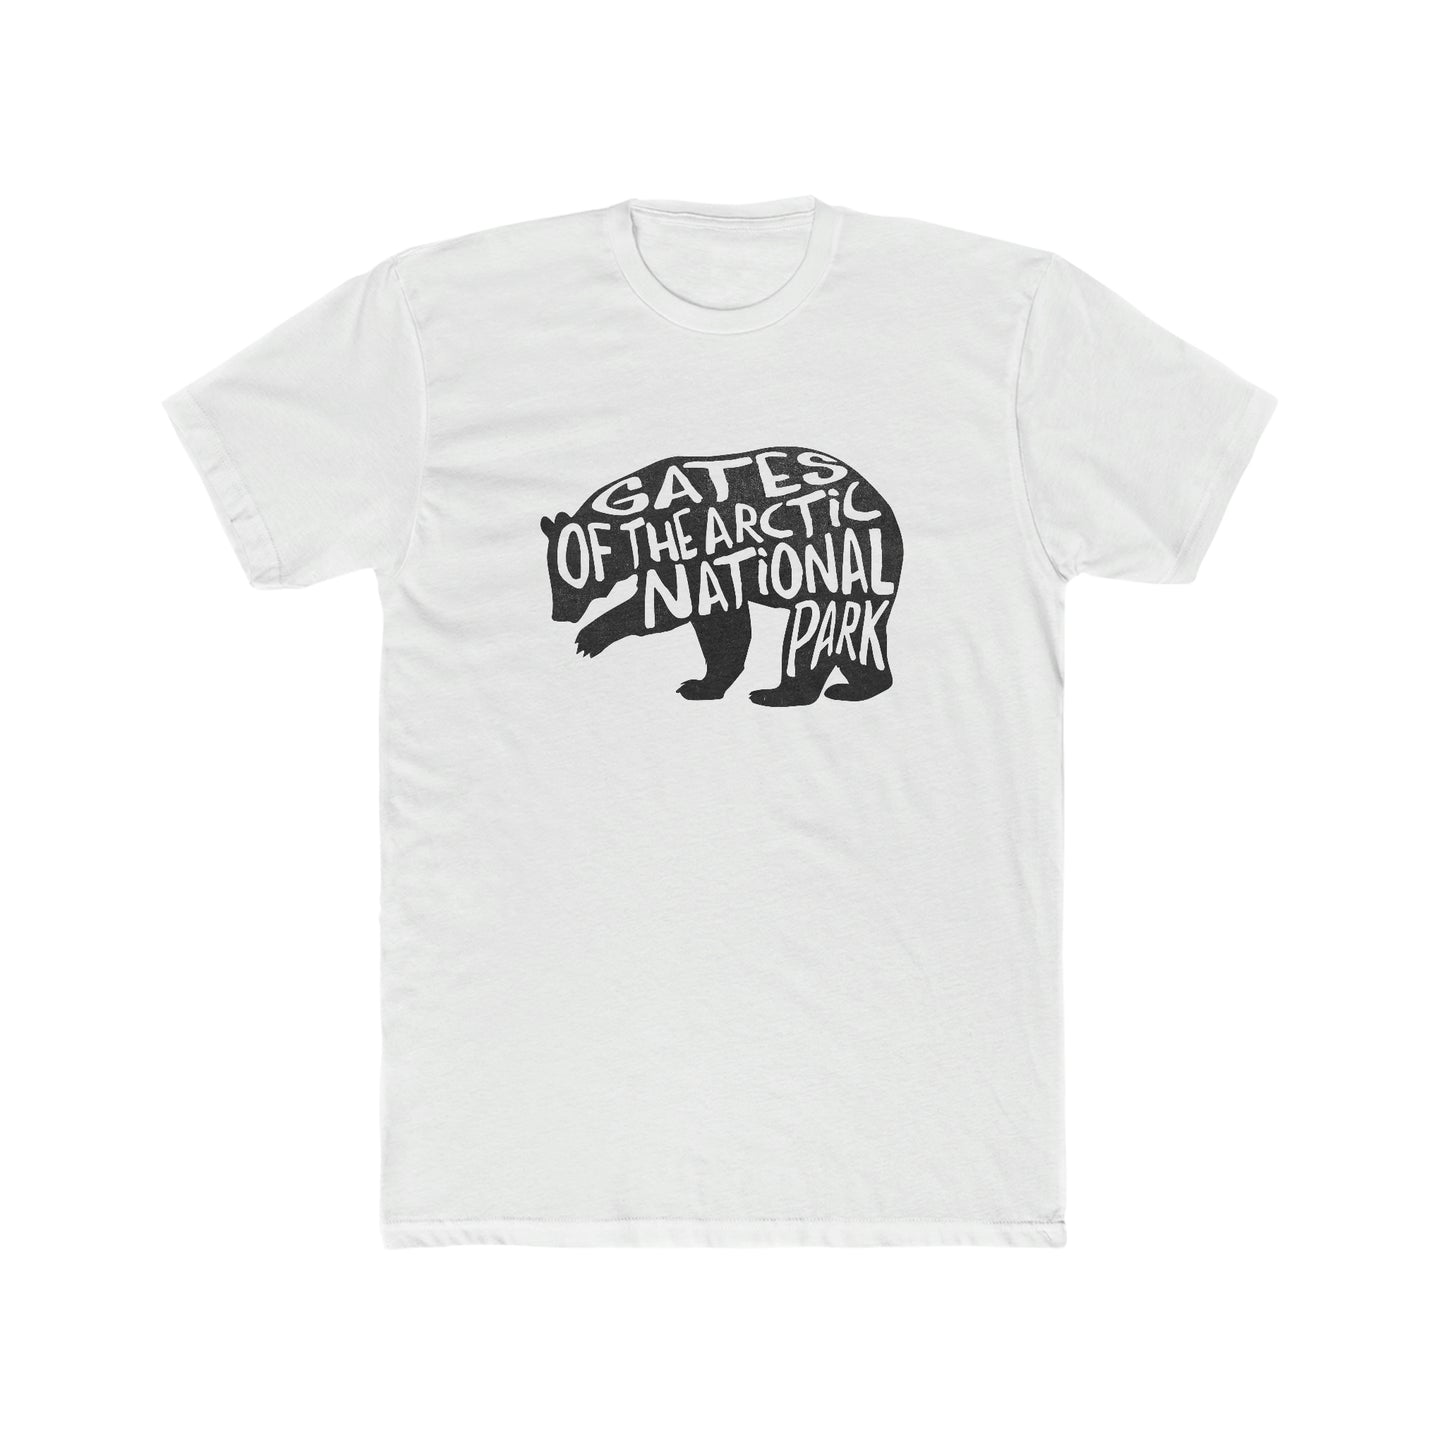 Gates of the Arctic National Park T-Shirt - Grizzly Bear